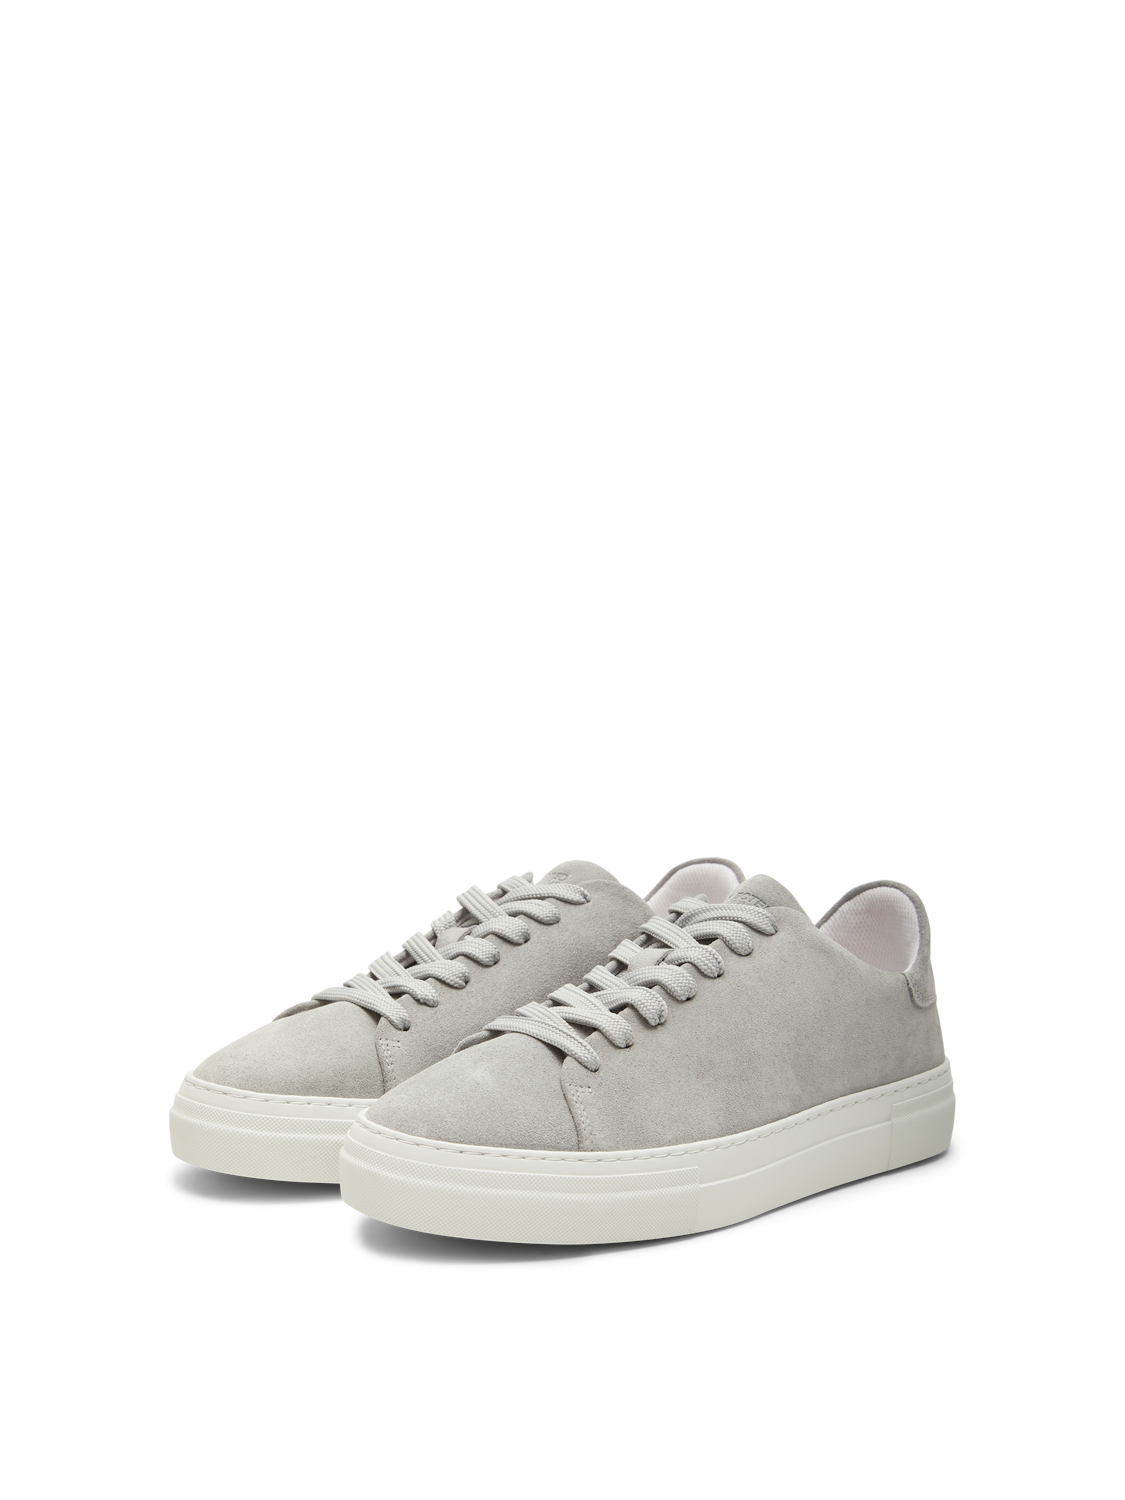 SELECTED HOMME - DAVID Shoes - Grey